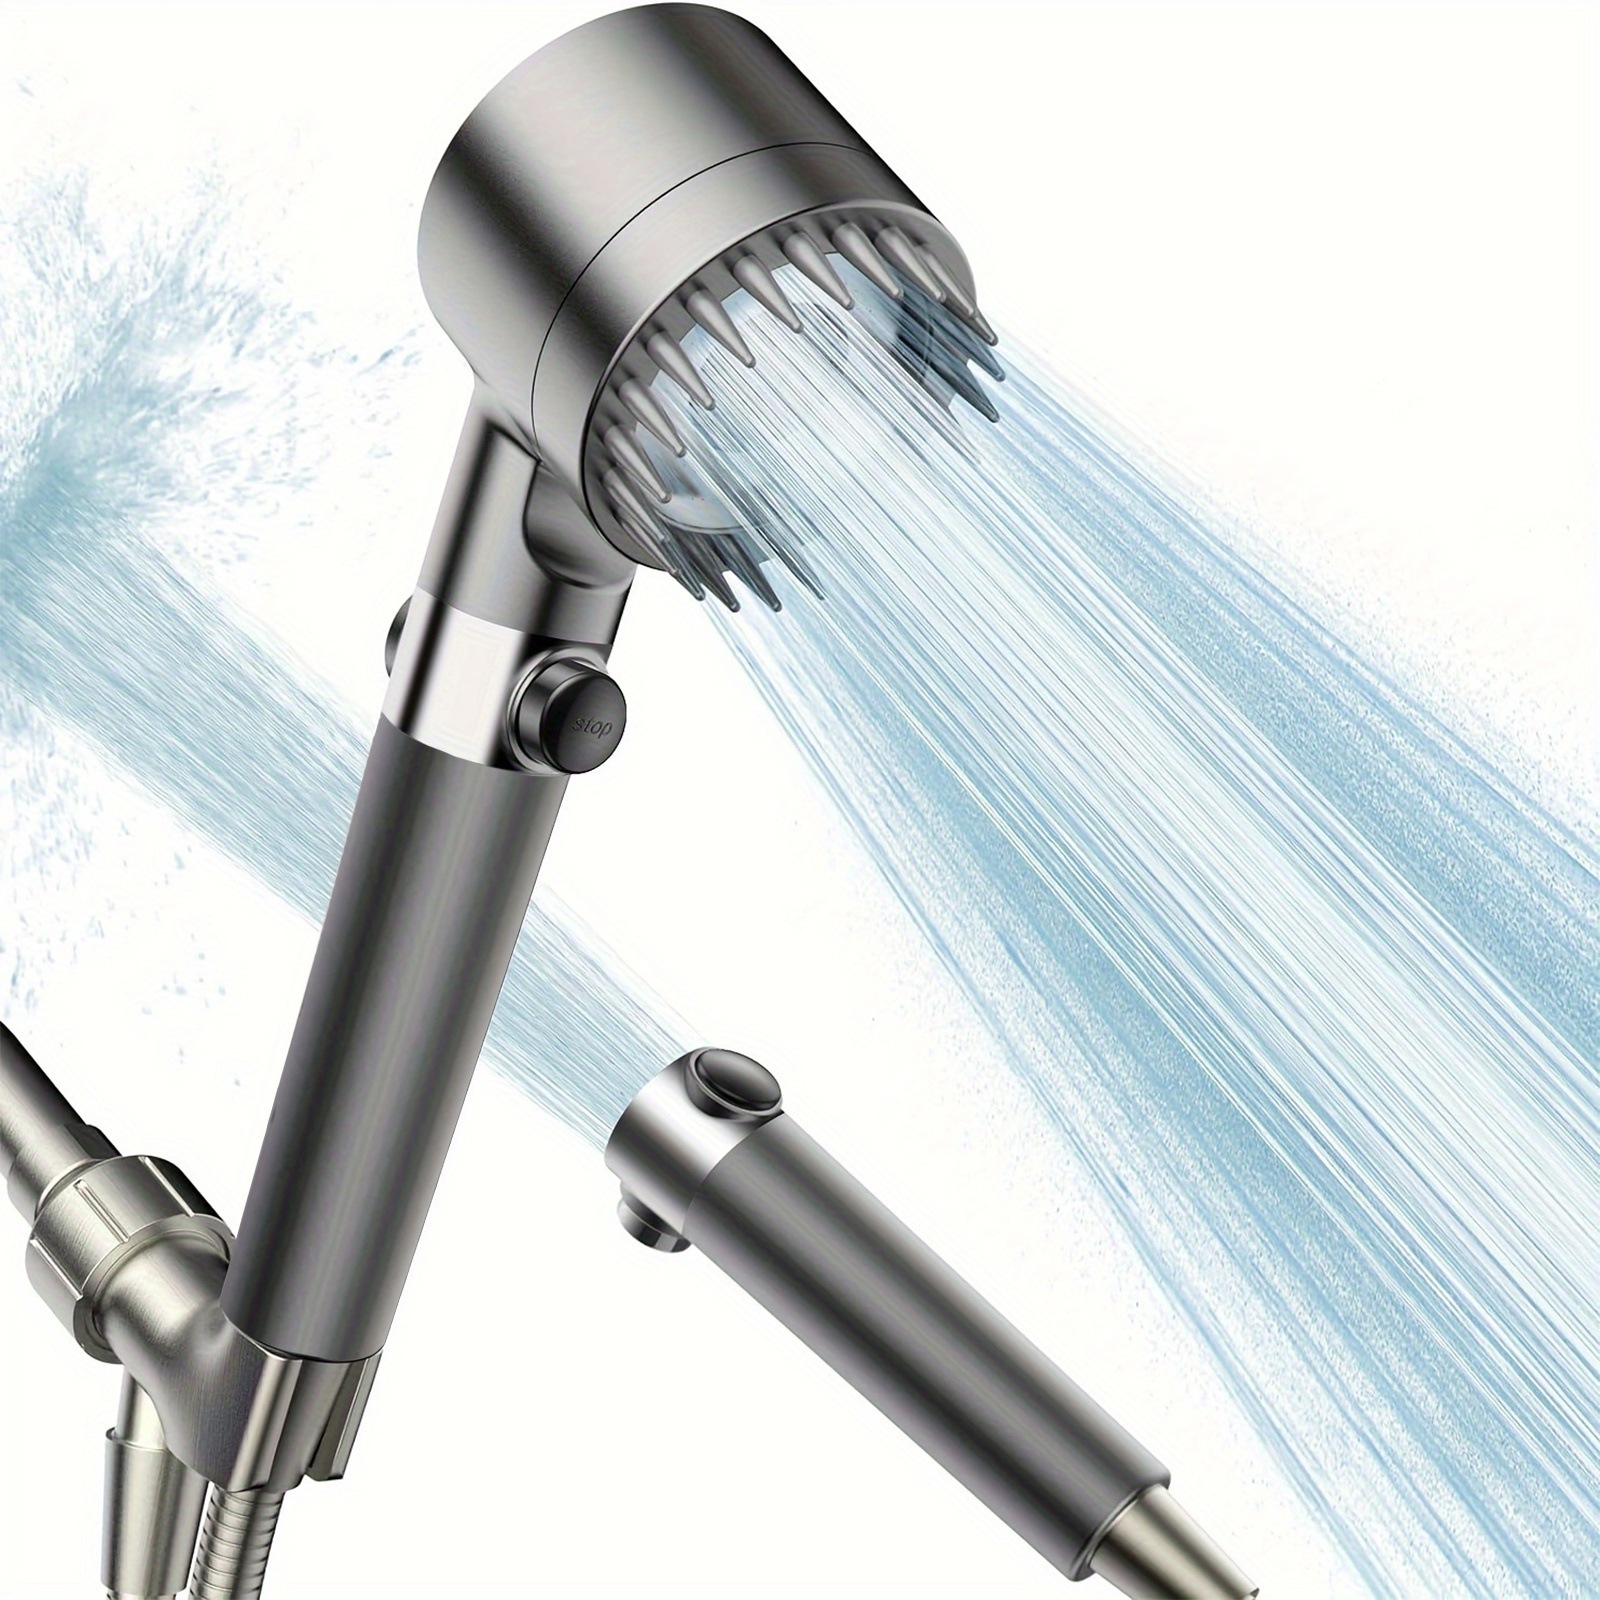 

Filtered Shower Head, High Pressure Water Flow And Multiple Spray Modes Shower Head With Filter, Power Wash For Hard Water, Showerhead With On/off Switch For Pets Bath